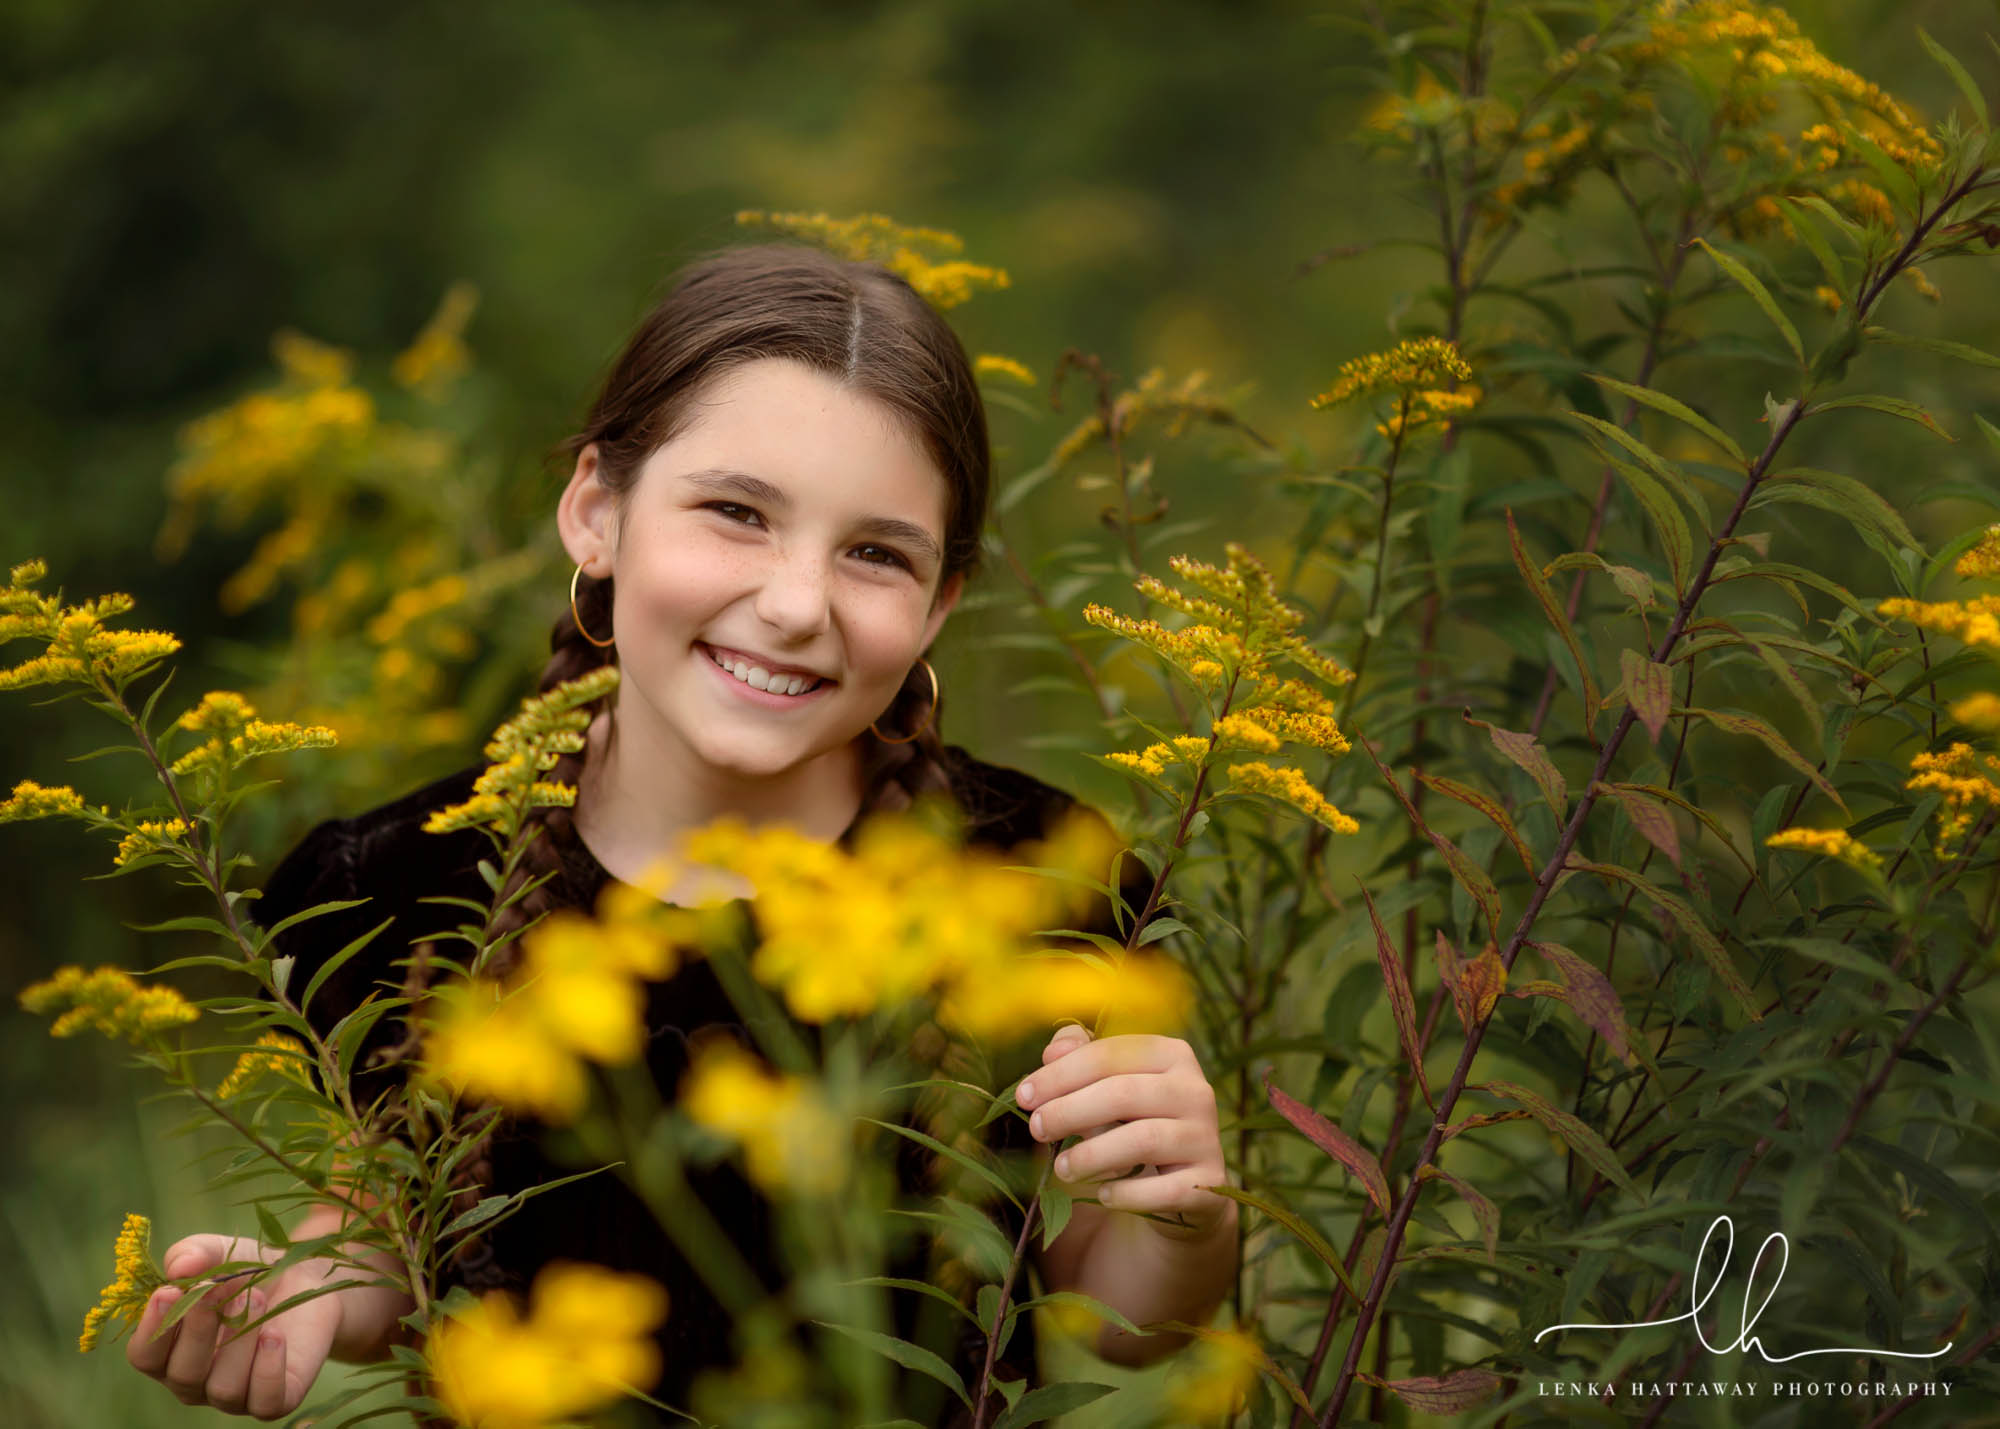 Bautiful smiling child portrait with yellow flowers.